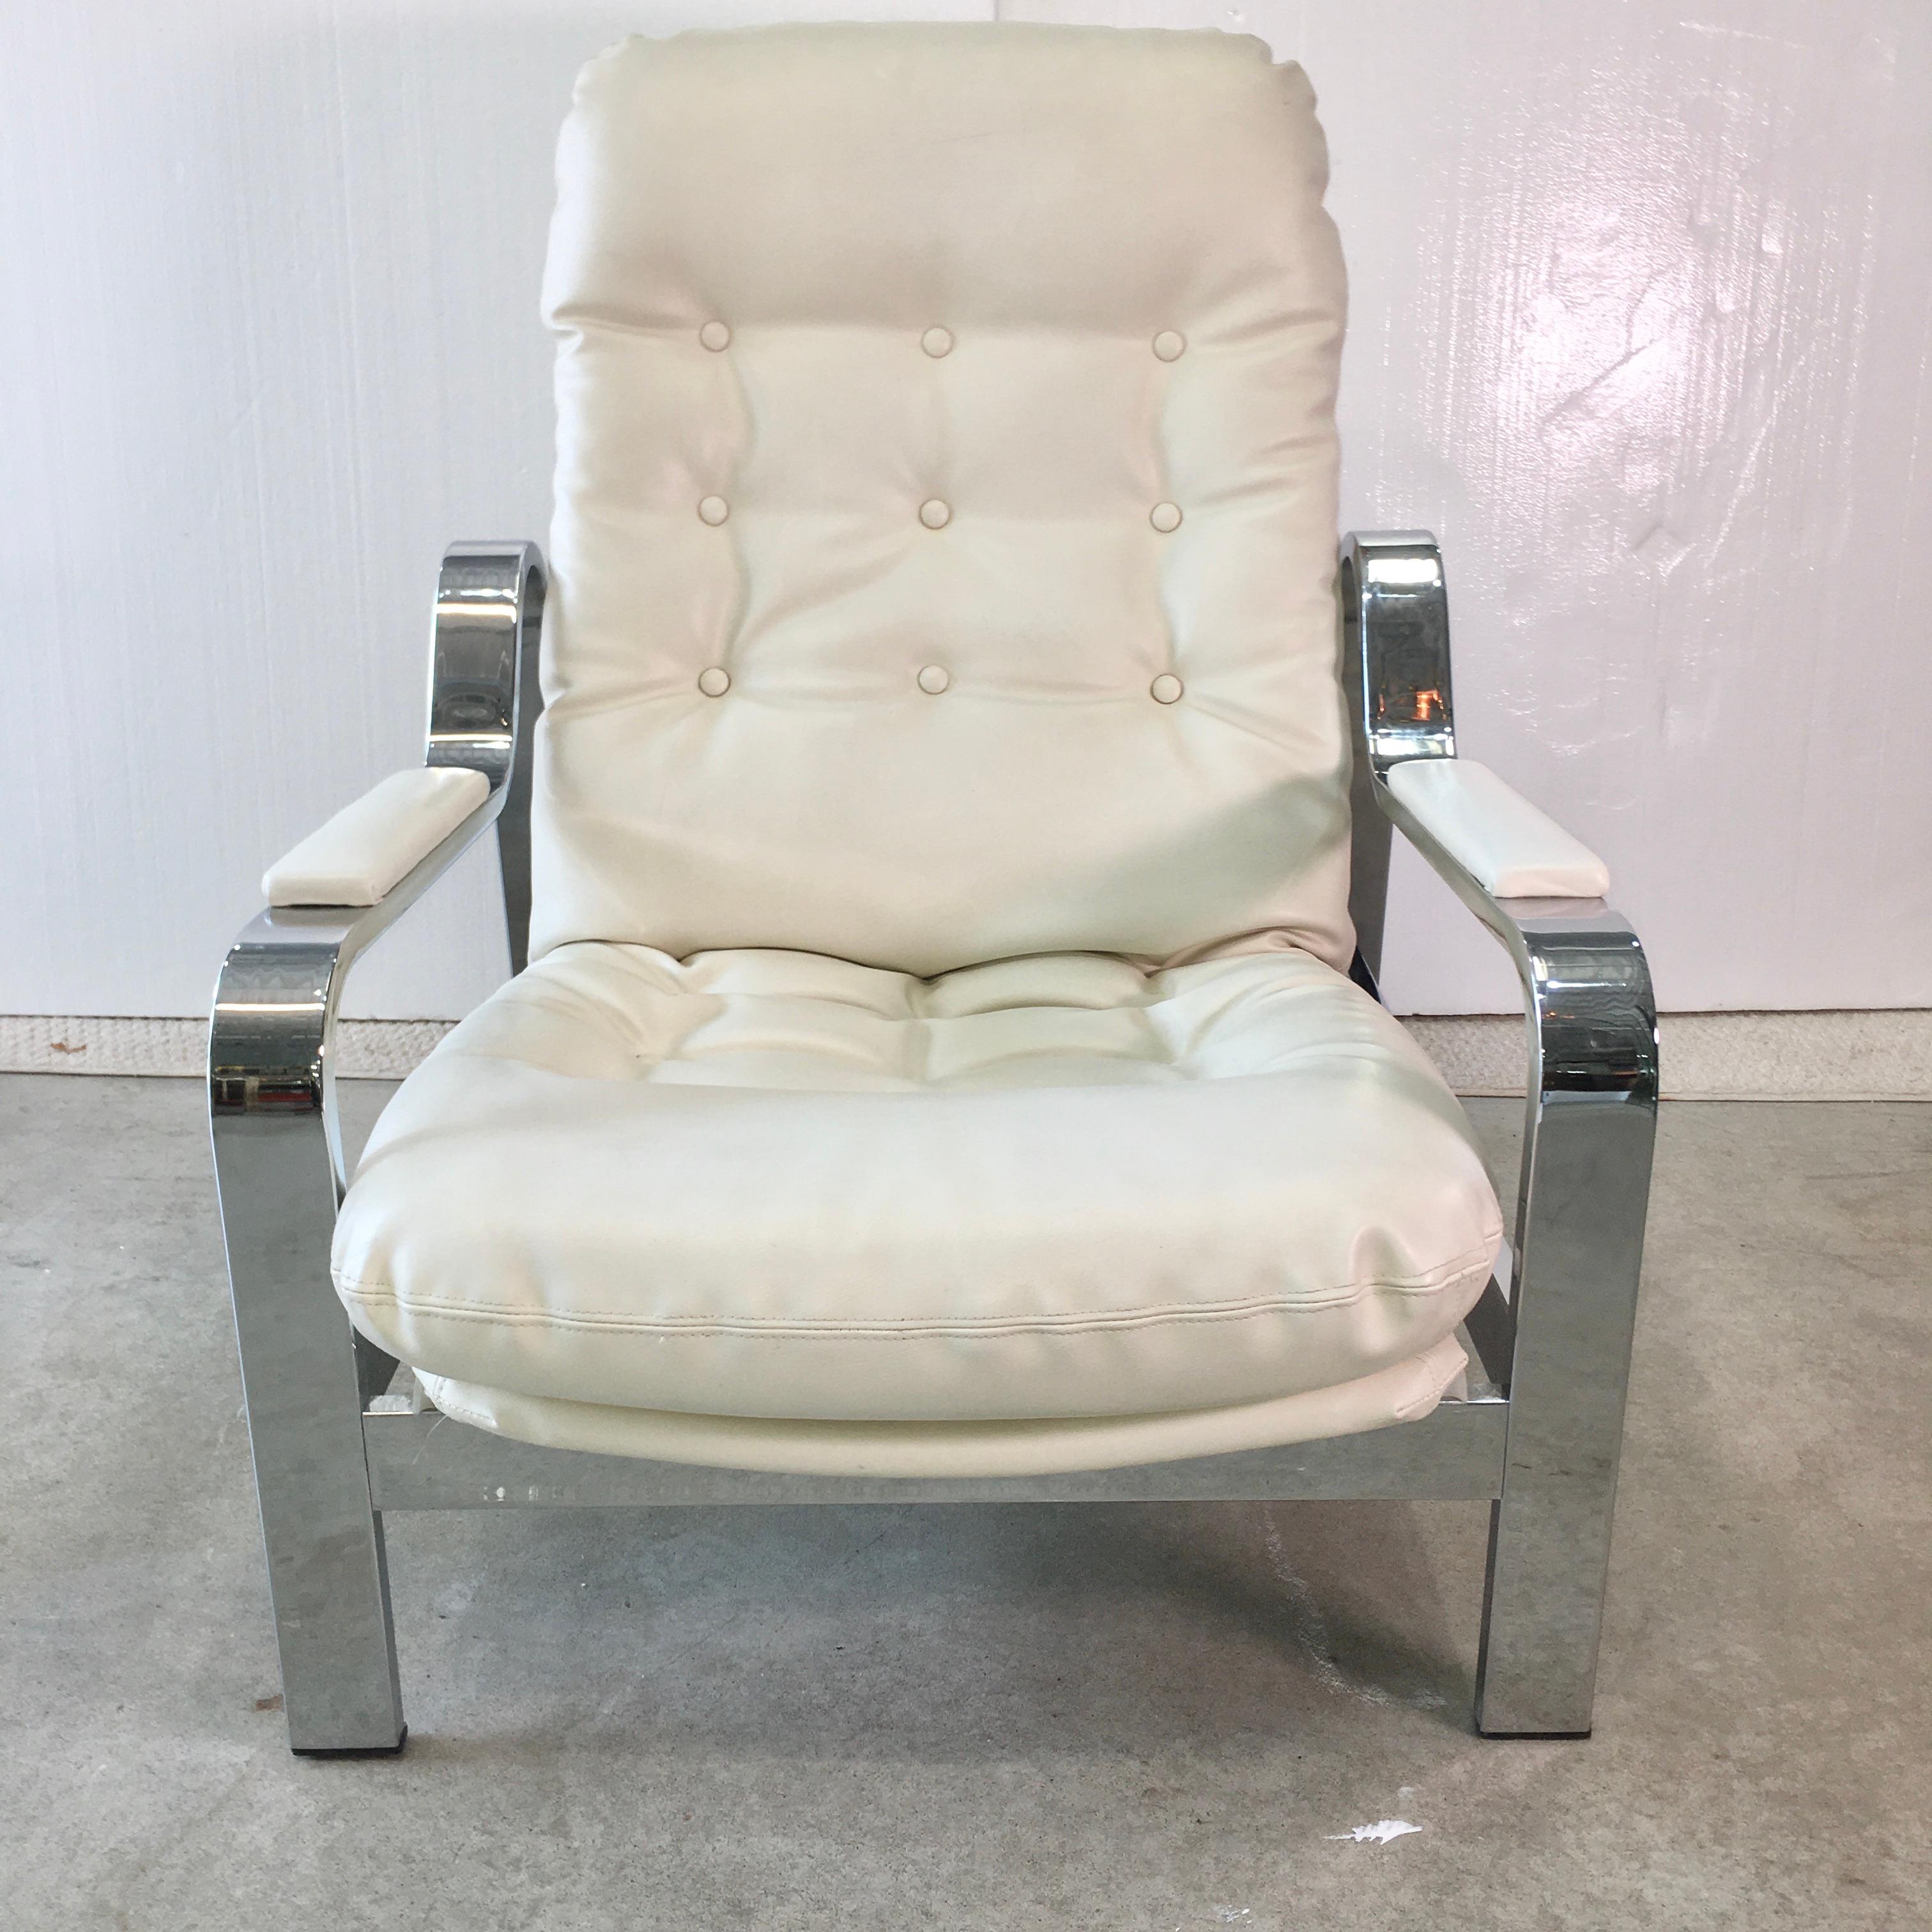 Selig 1970s Chrome Reclining Lounge Chair with Ottoman 10